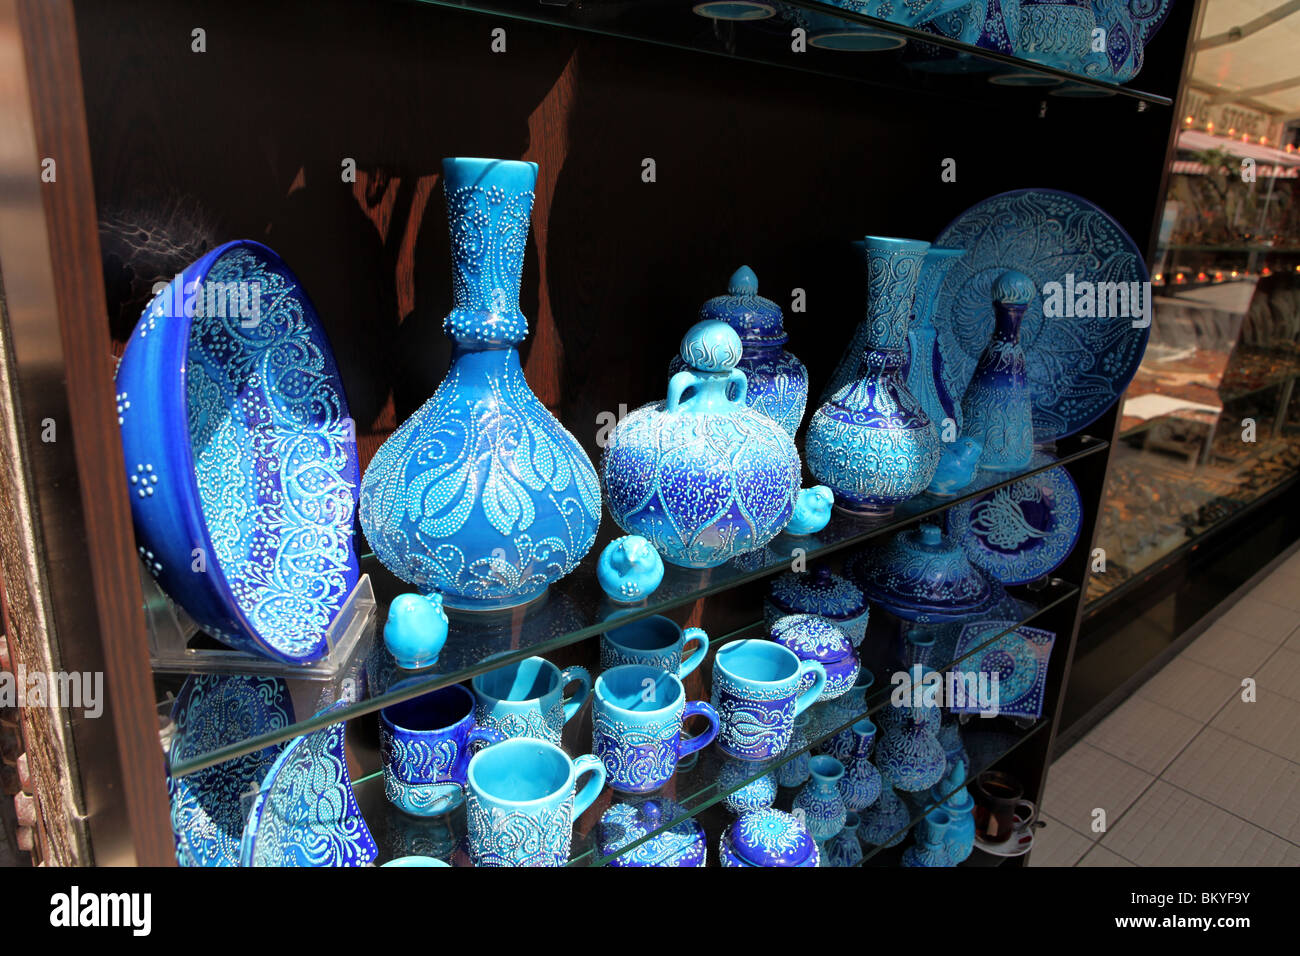 Blue pottery and vases on display in Istanbul, Turkey. Stock Photo